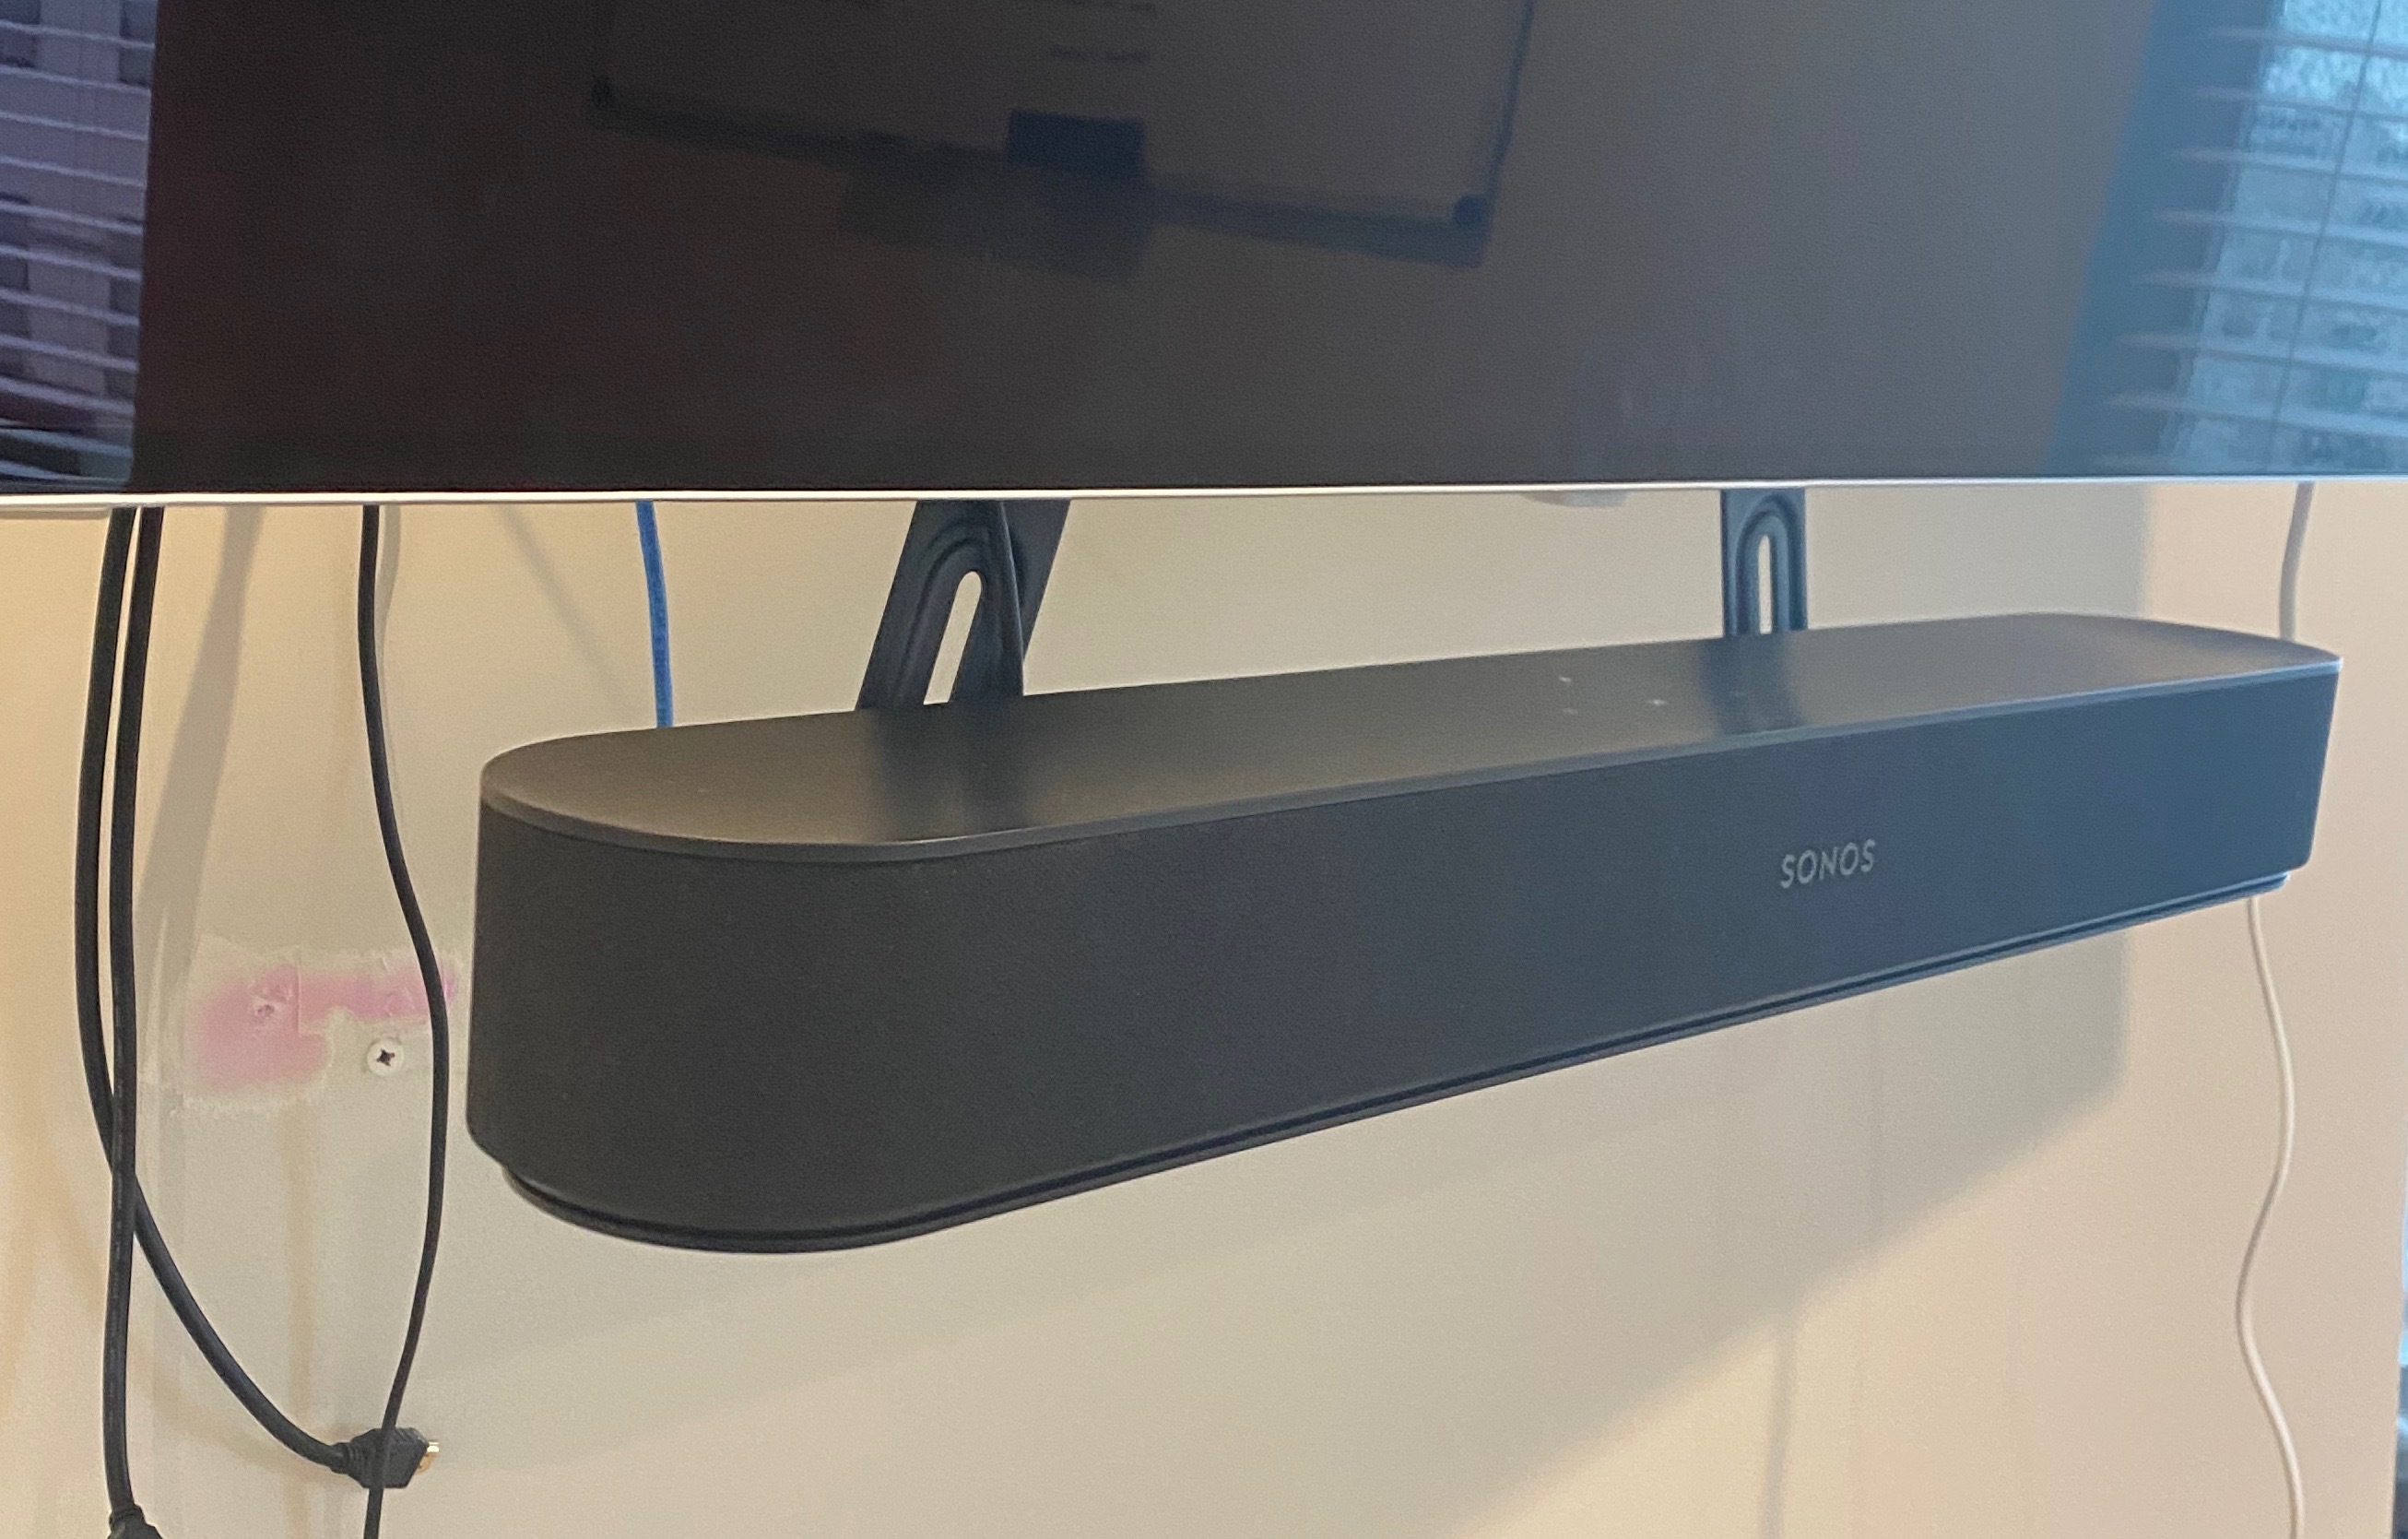 Mount Arc To Wall Mounted Tv Sonos Community